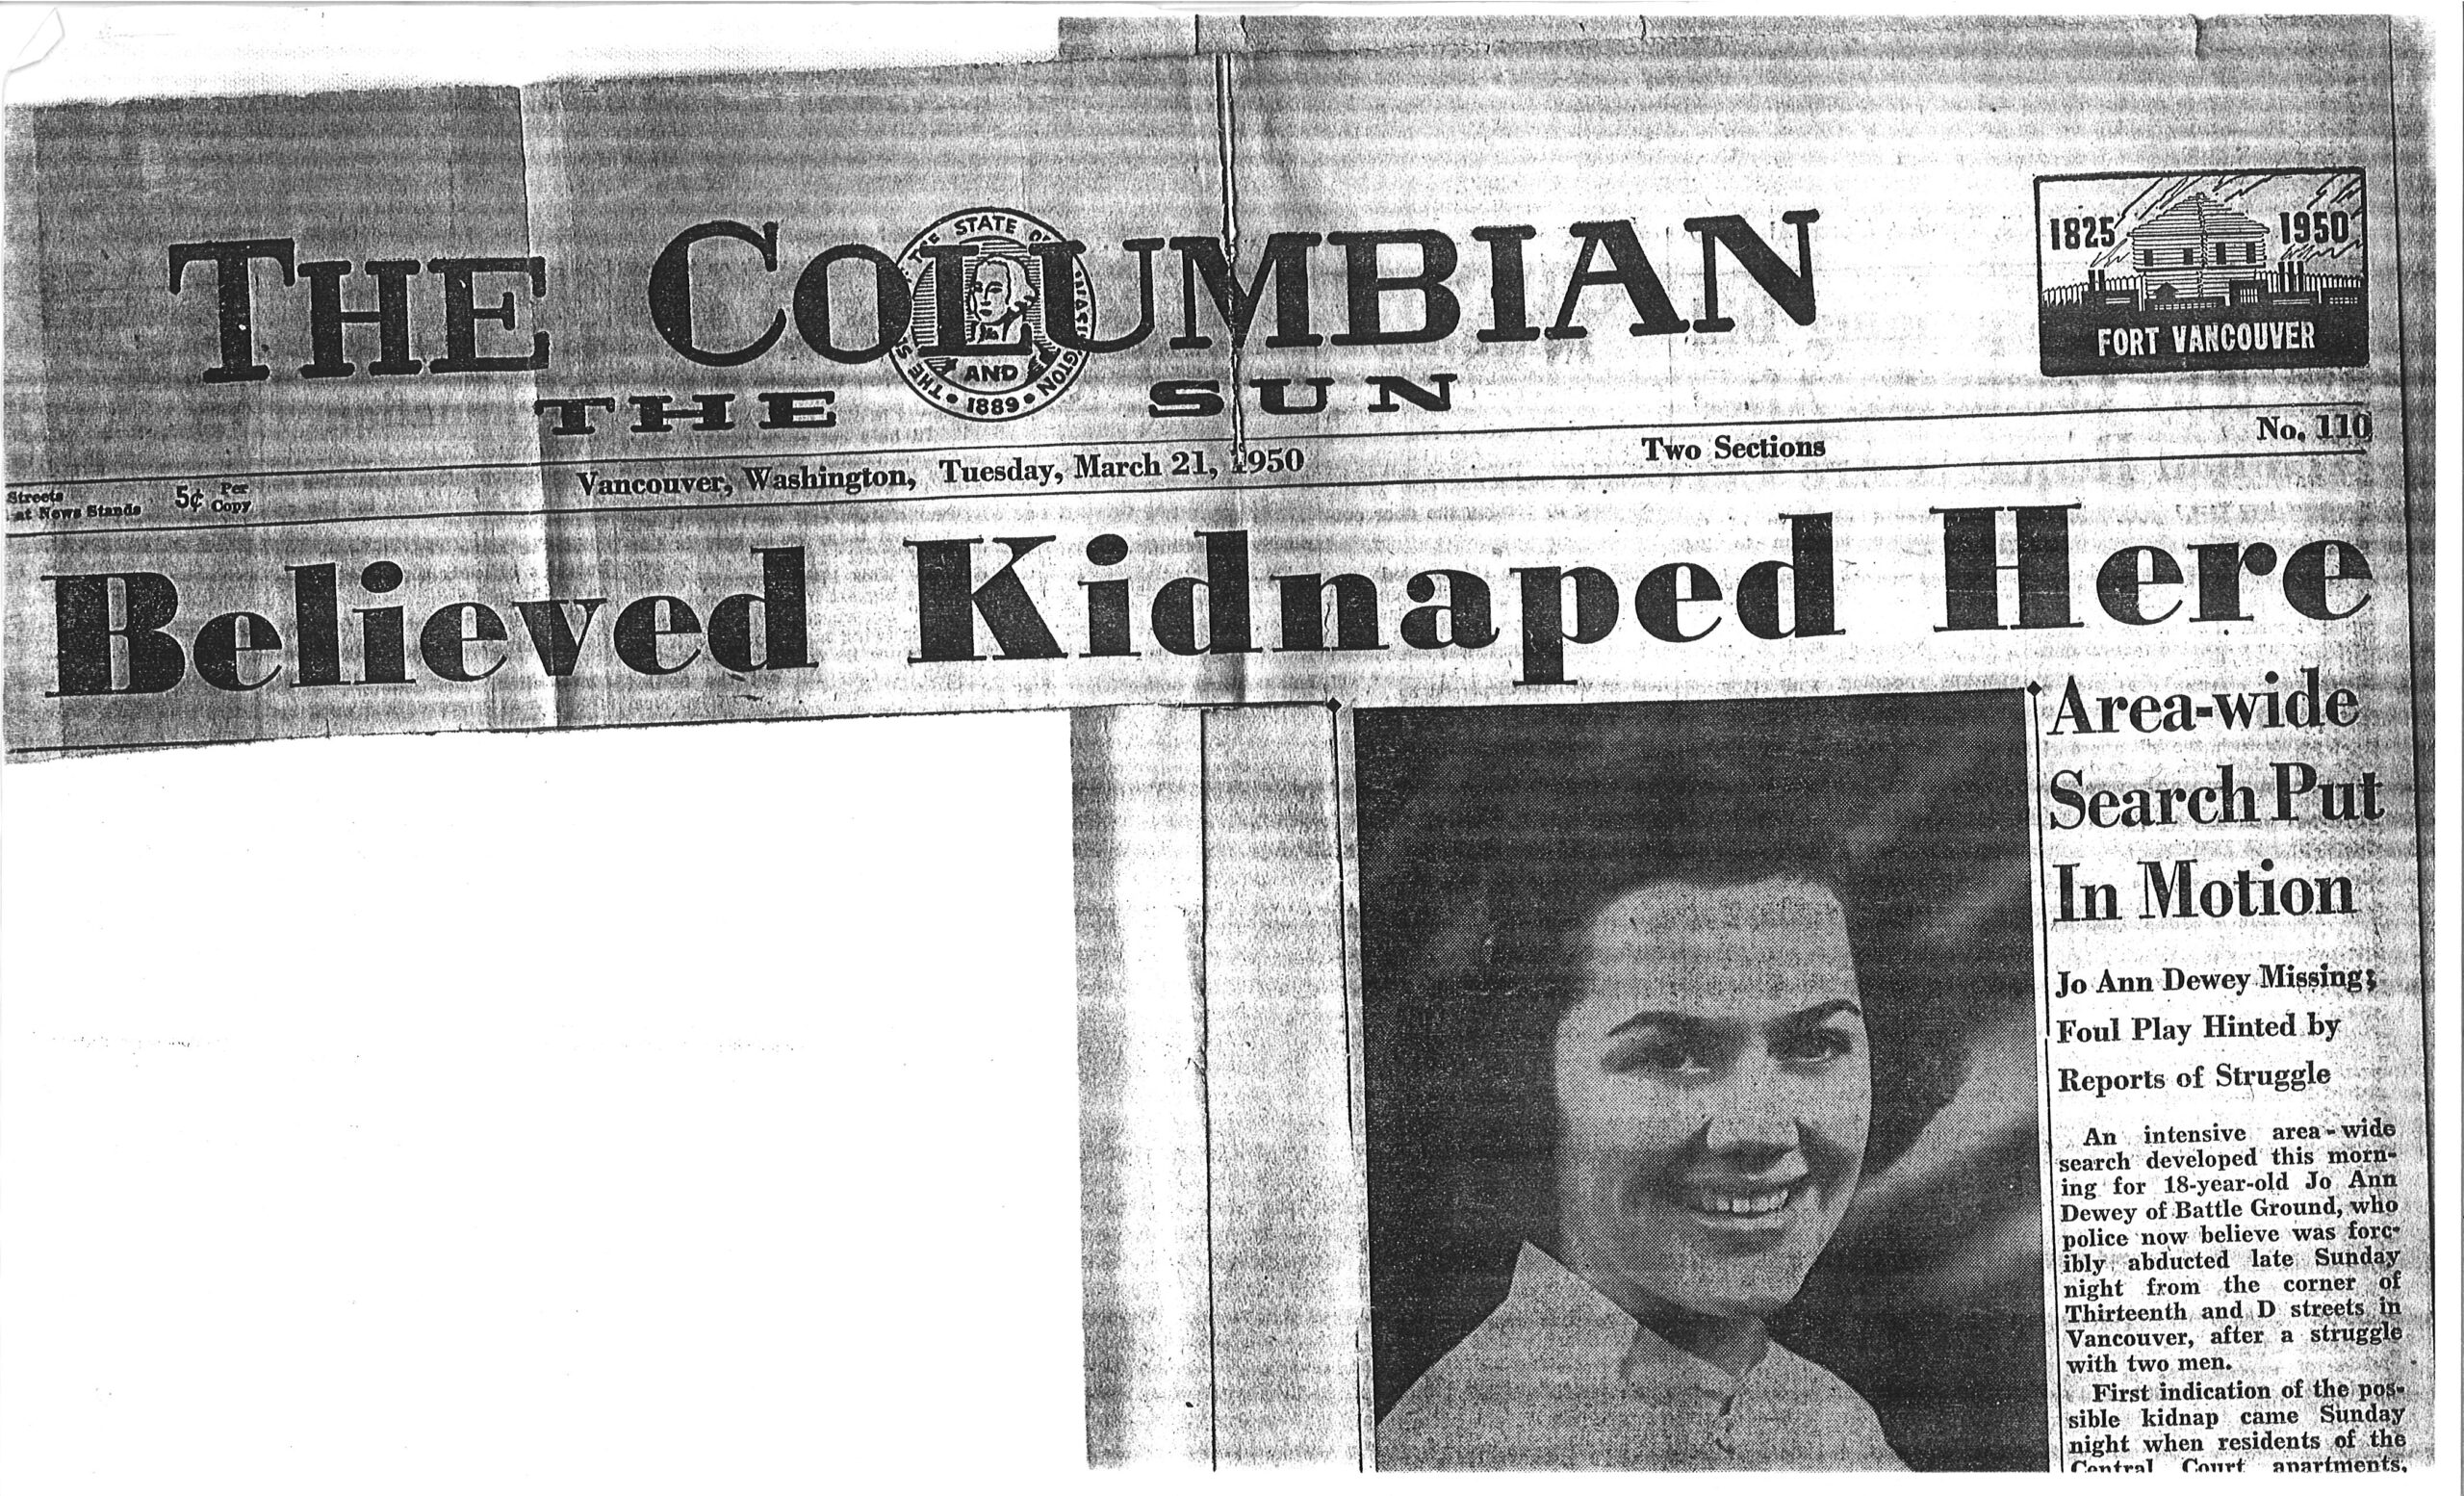 " Jo Ann Dewey Believed Kidnaped Here" The Columbian The Sun newpaper article from March 21, 1950